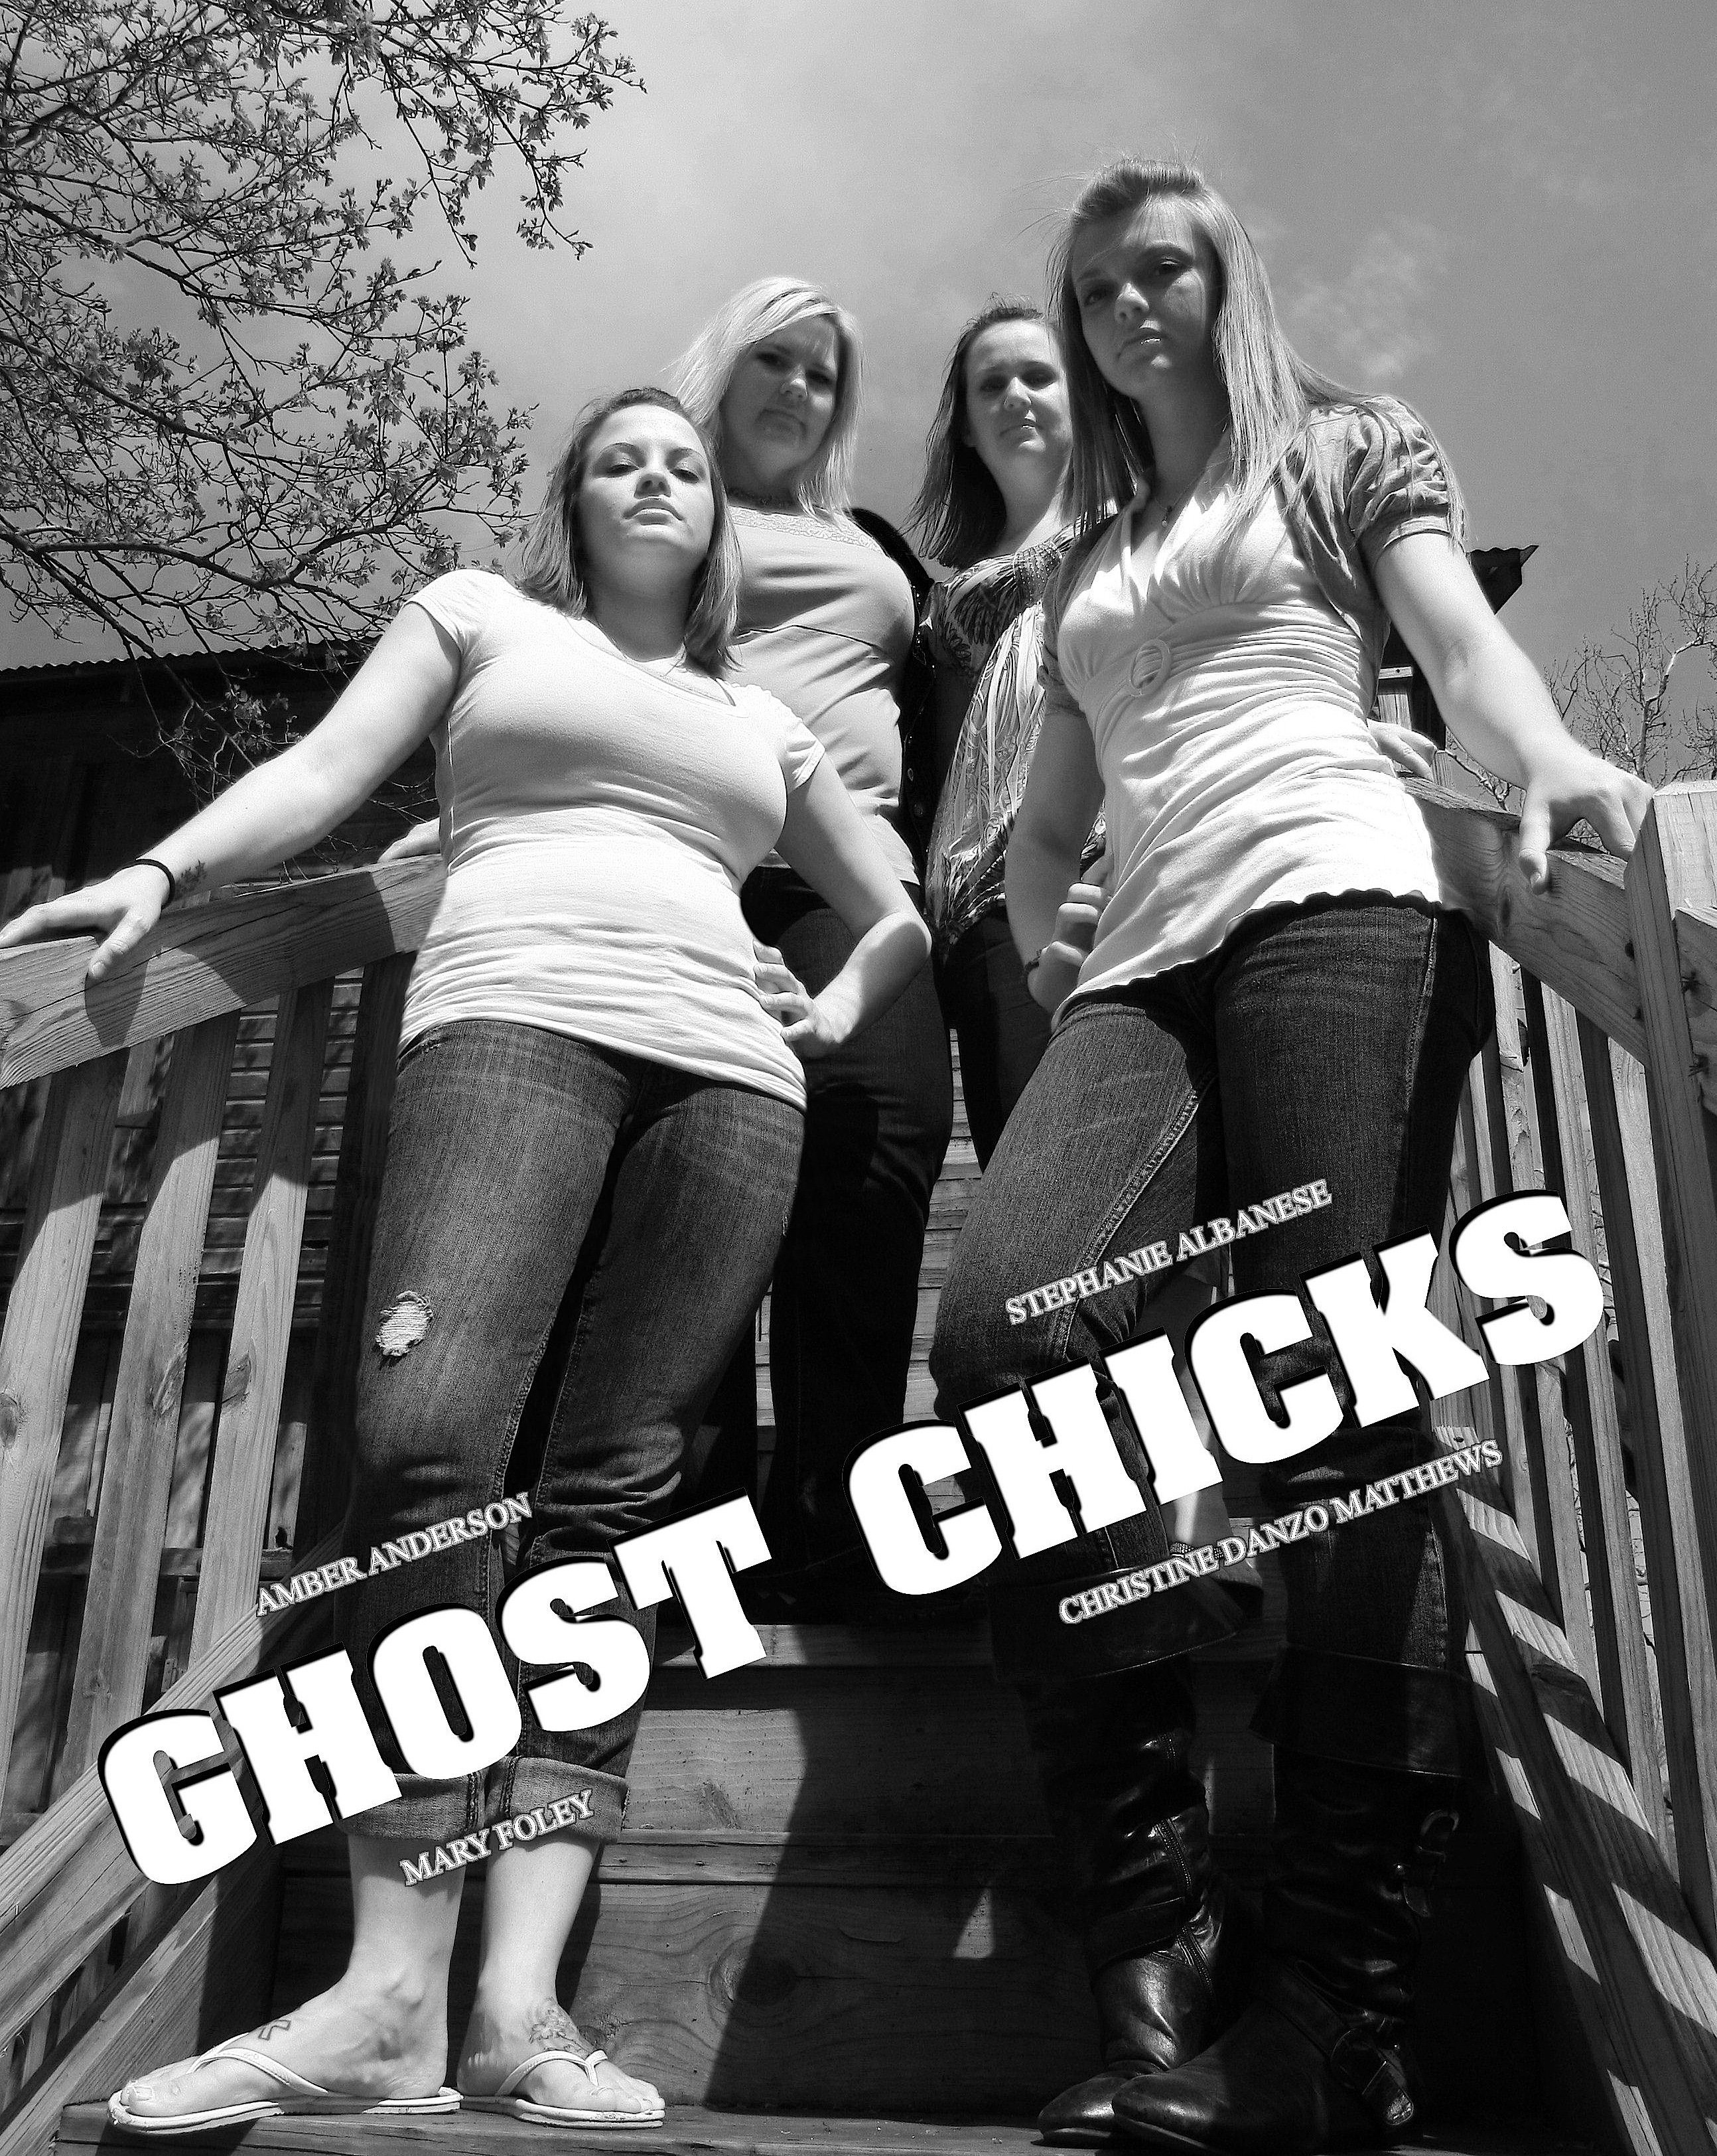 Official Poster for the paranormal ghost hunting series 